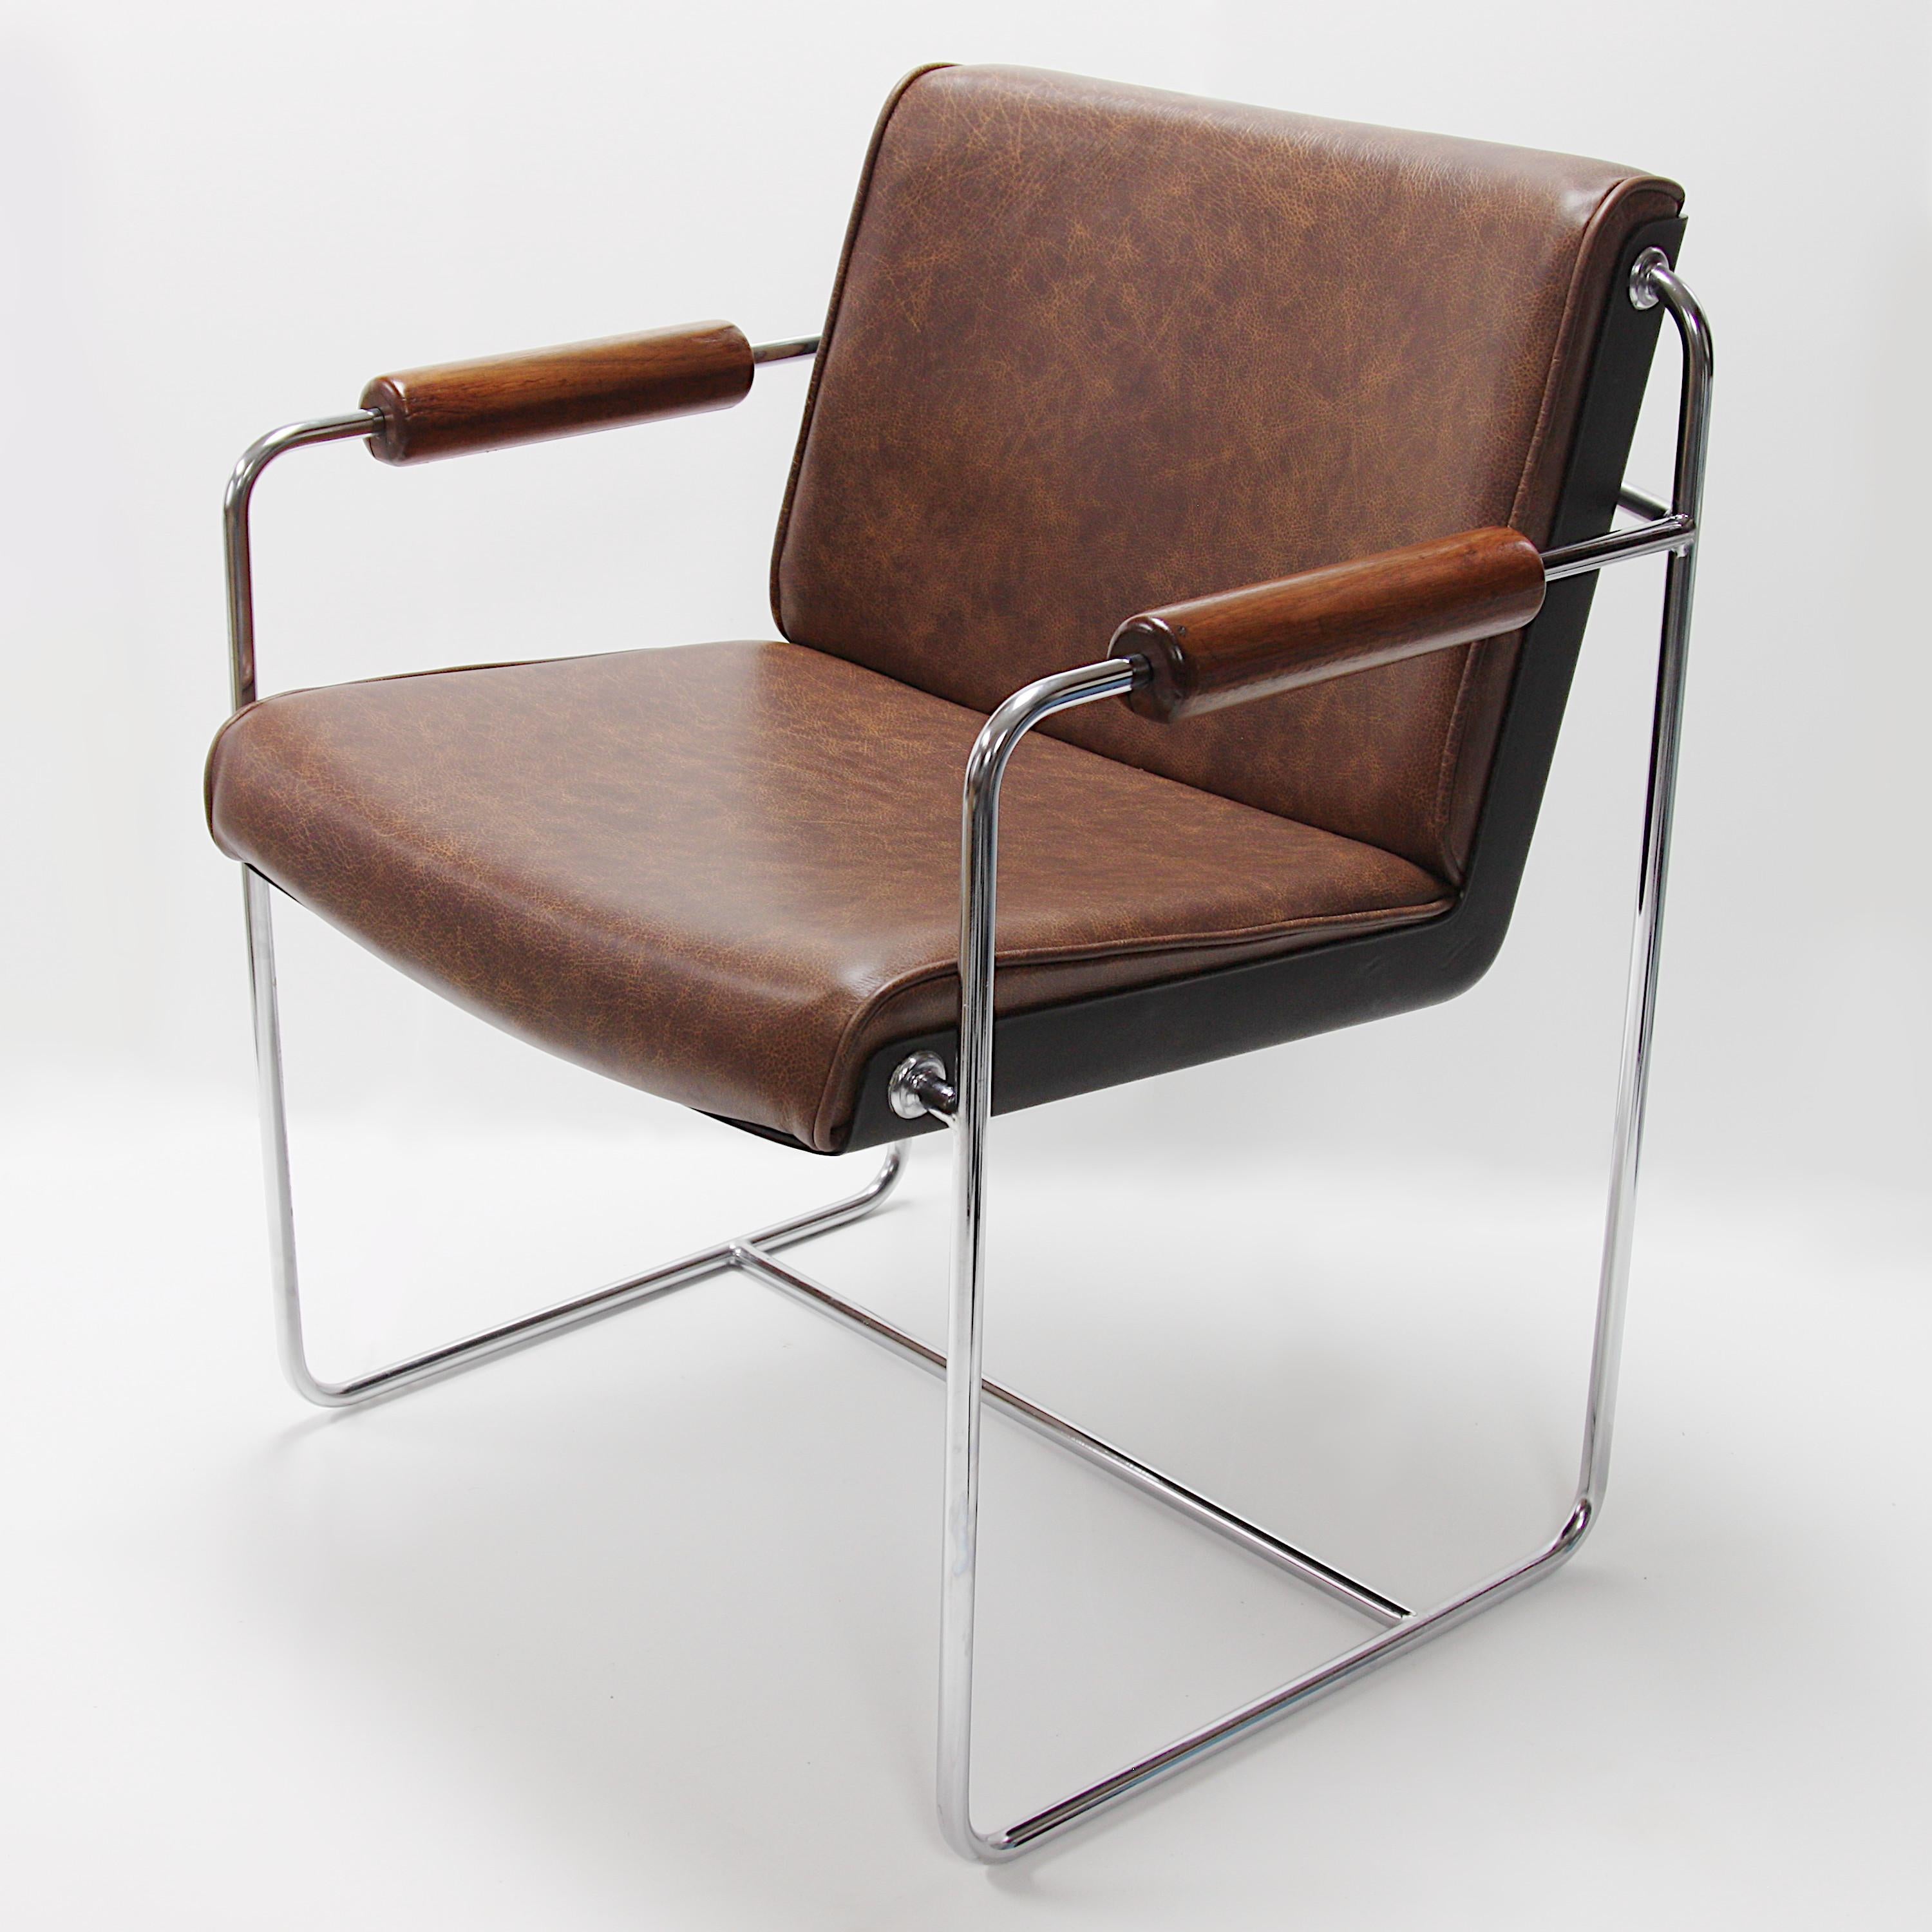 Rare Pair of Mid-Century Modern Fiberglass and Brown Leather Shell Lounge Chairs For Sale 2